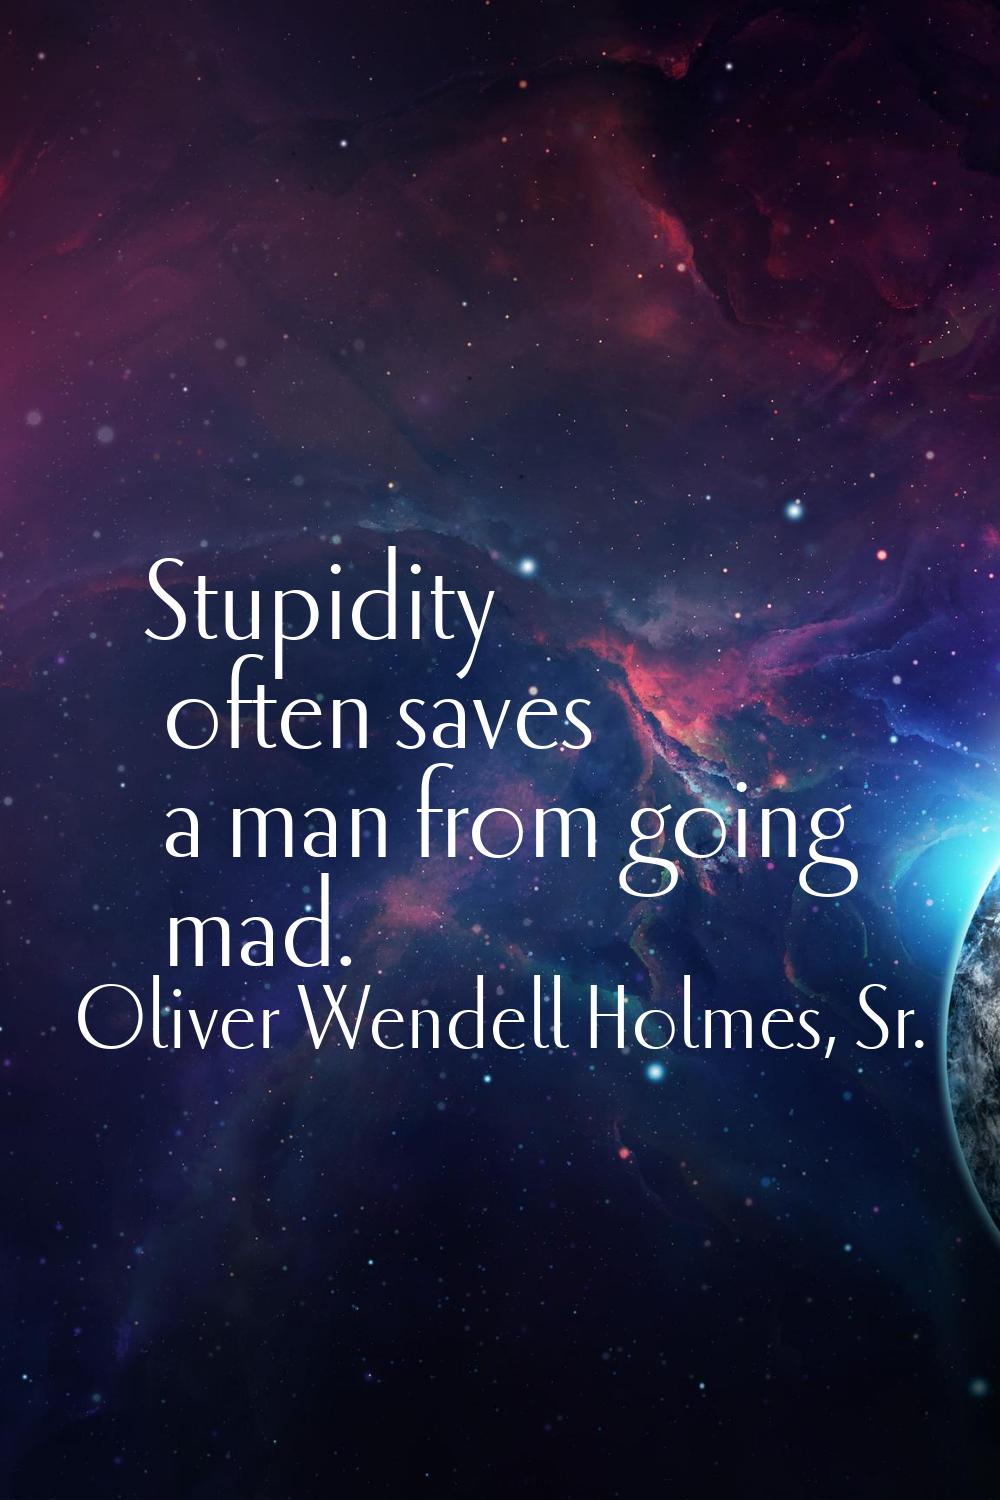 Stupidity often saves a man from going mad.